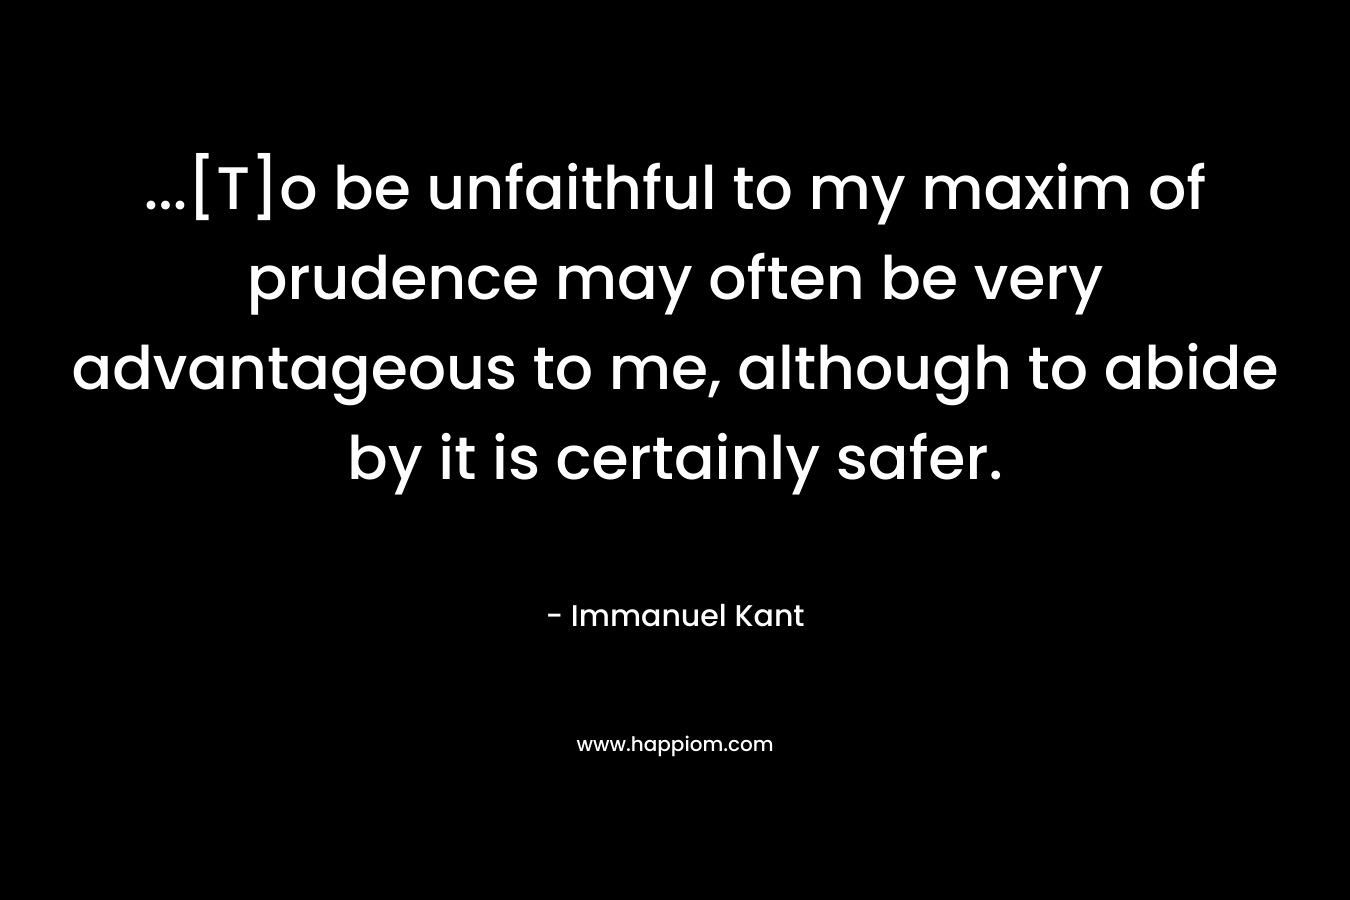 …[T]o be unfaithful to my maxim of prudence may often be very advantageous to me, although to abide by it is certainly safer. – Immanuel Kant